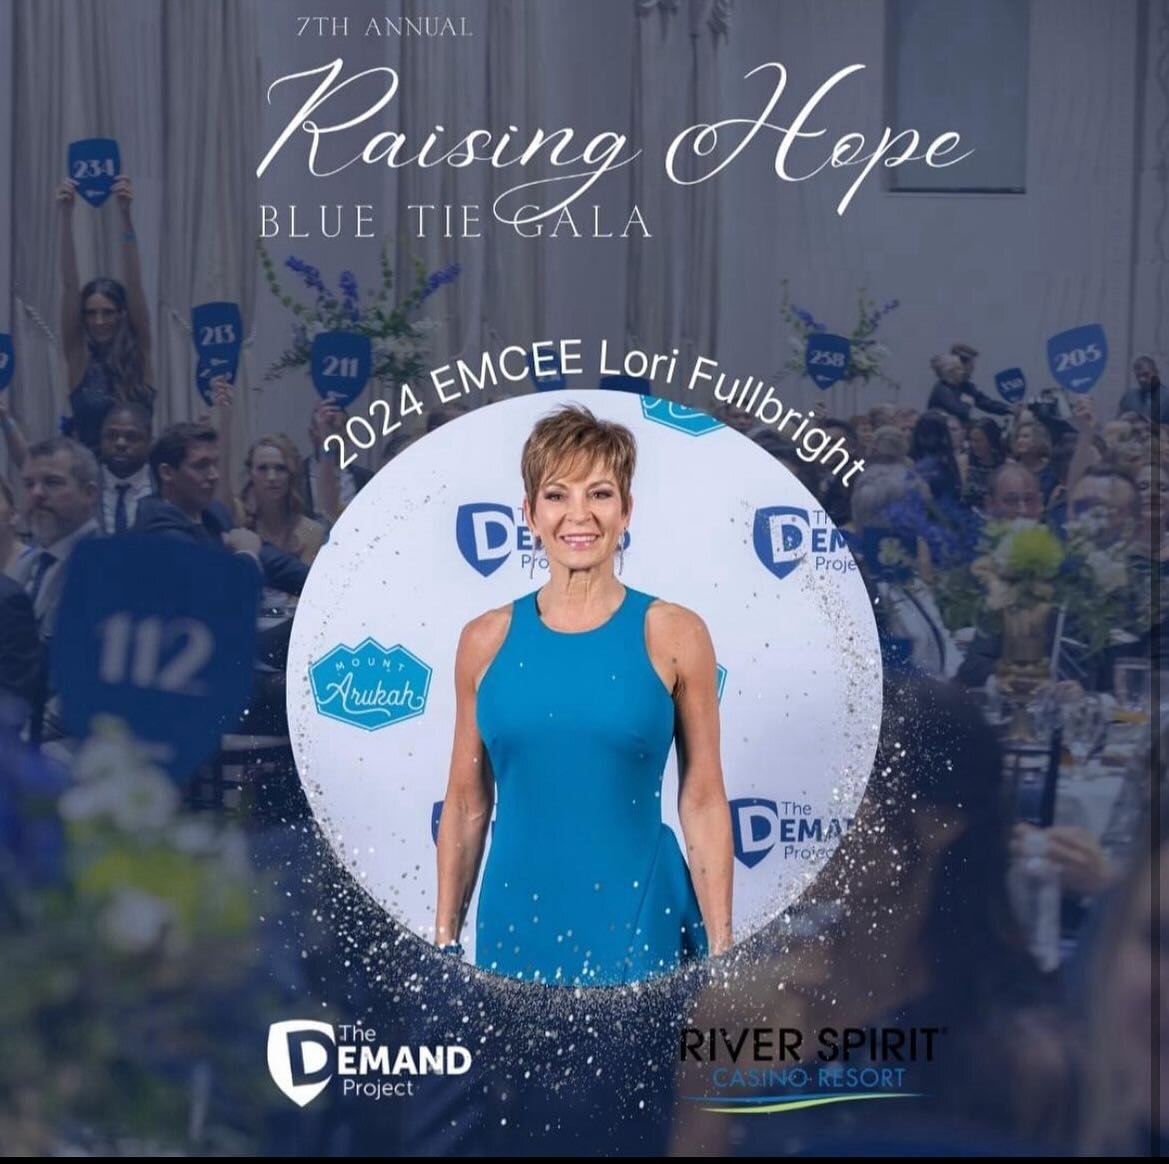 🎤 Exciting News! The Demand Project is thrilled to announce that Lori Fullbright will be returning as the EMCEE for our 7th Annual Raising Hope Blue Tie Gala in 2024!

About Lori Fullbright:
With an impressive 31-year tenure as the station&rsquo;s c